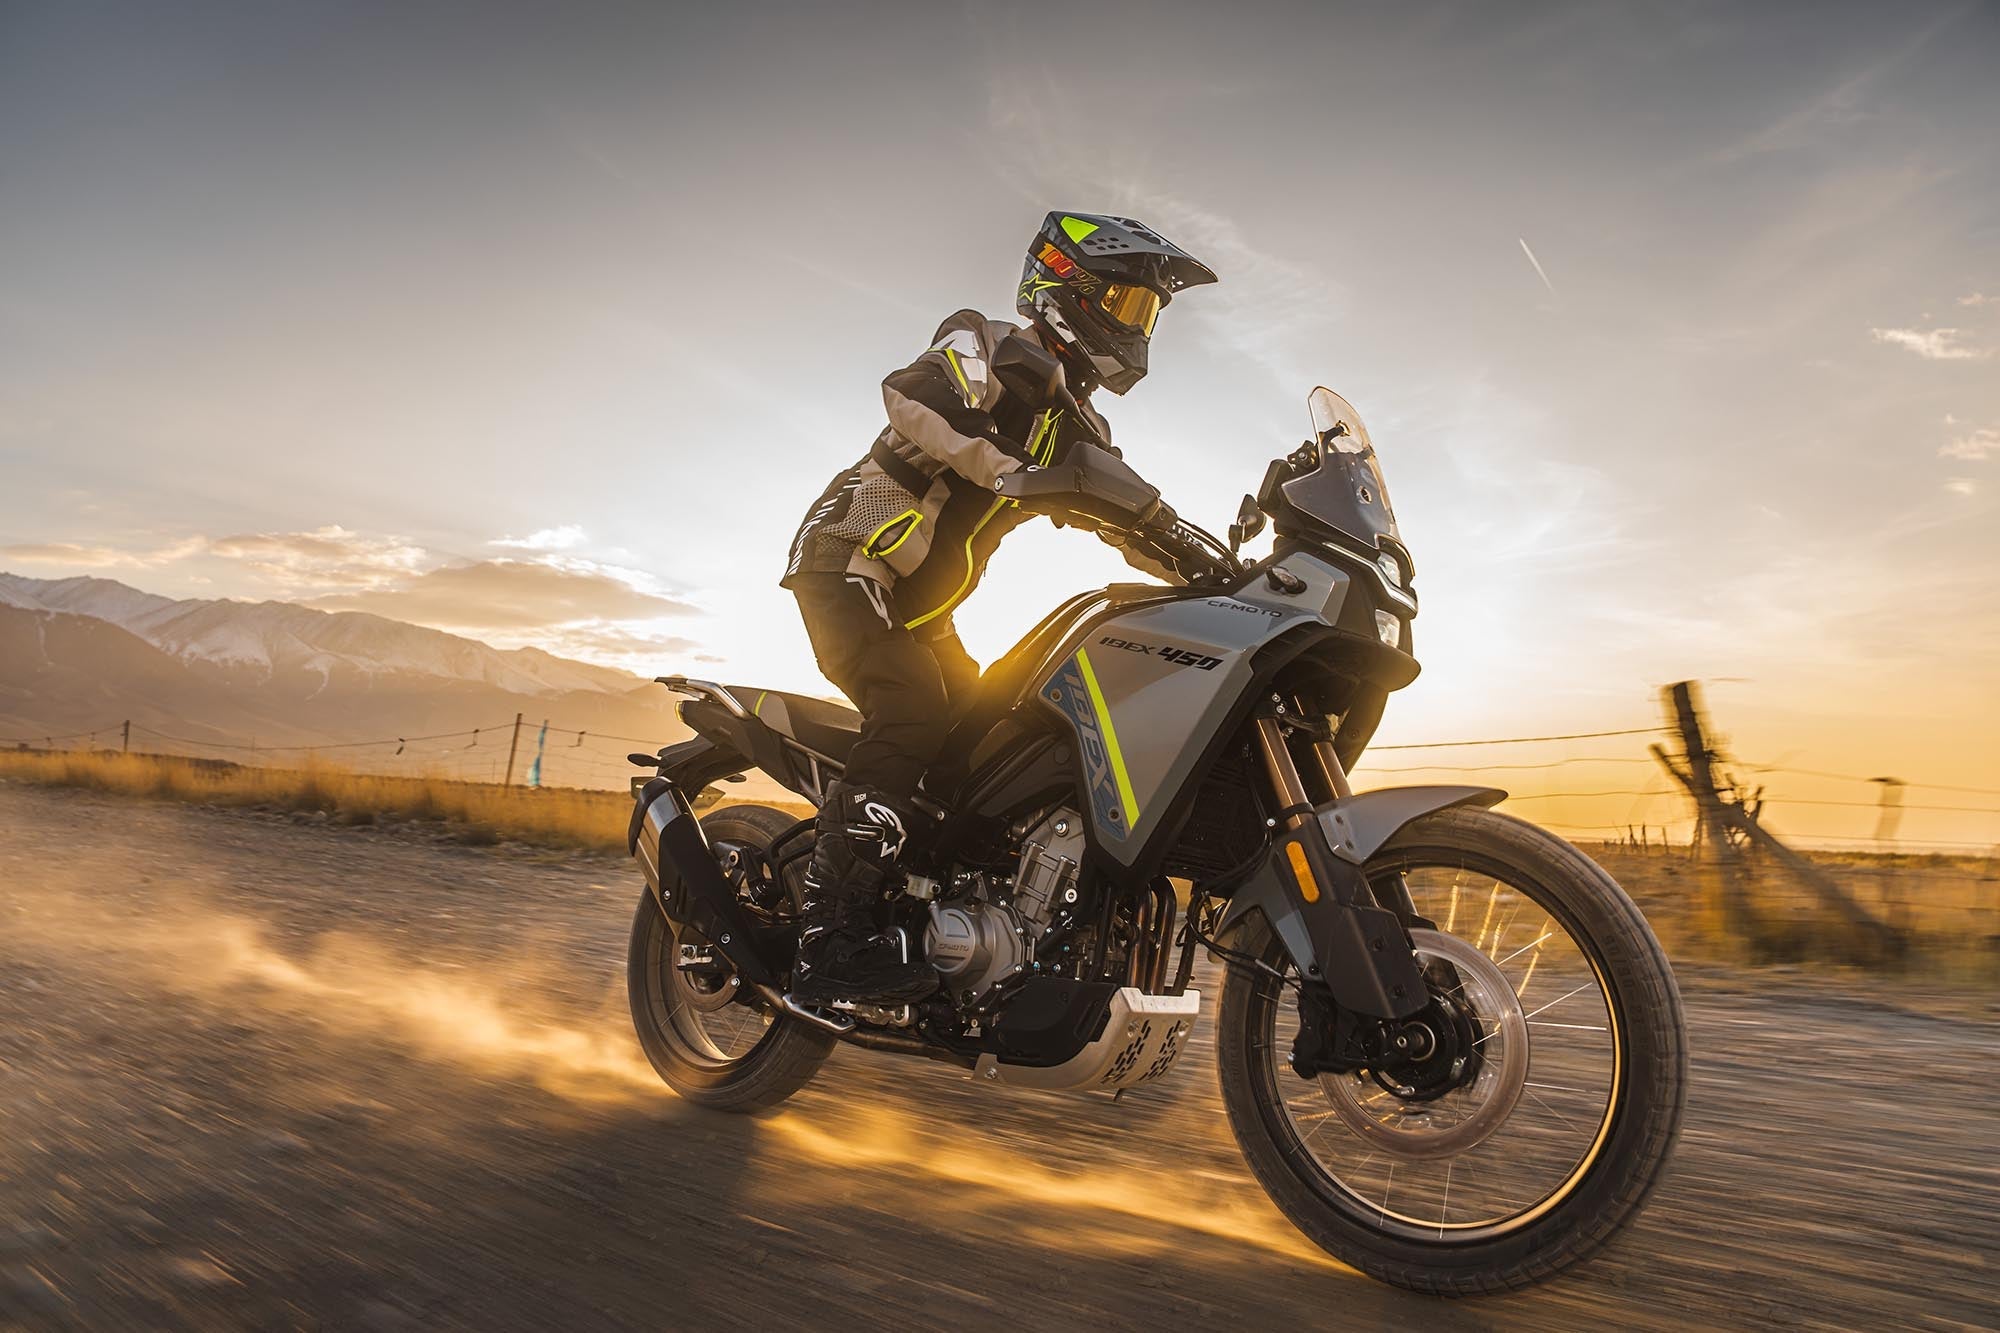 CFMOTO Launches the Ibex 450 and 450CL-C Motorcycles in the U.S.